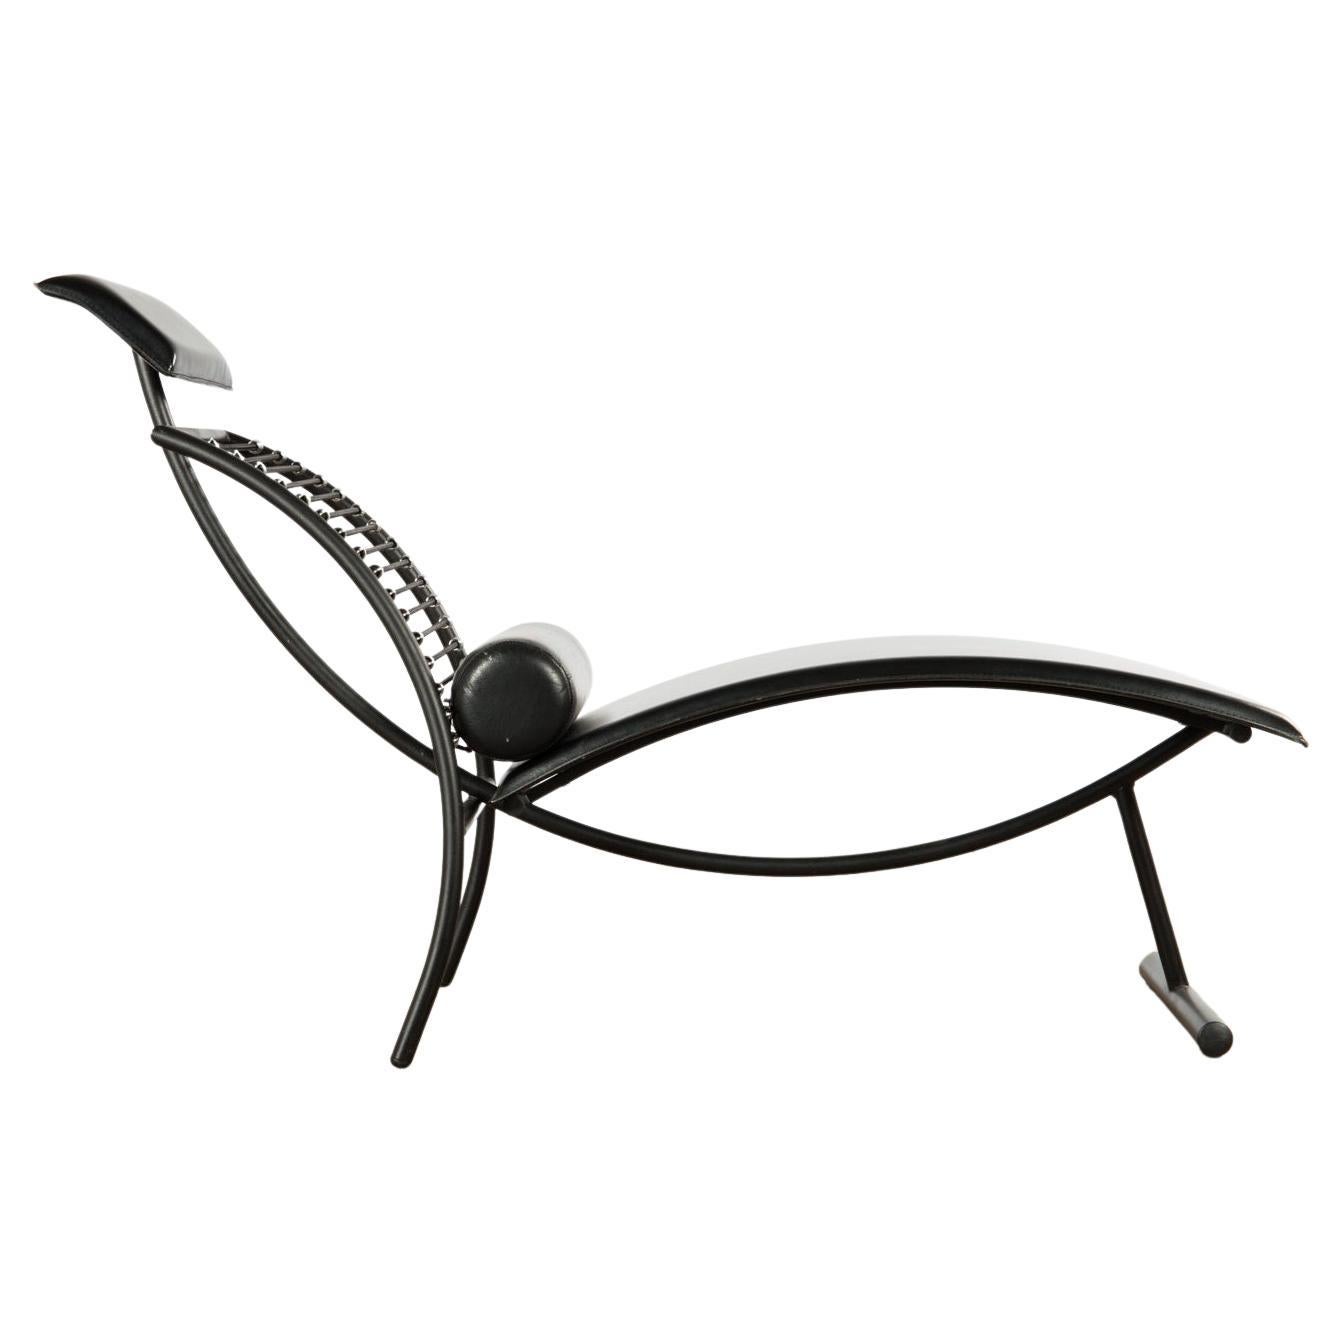 Post-Modern Italian Chaise Lounge Chair in Faux Black Leather, 1980s For Sale